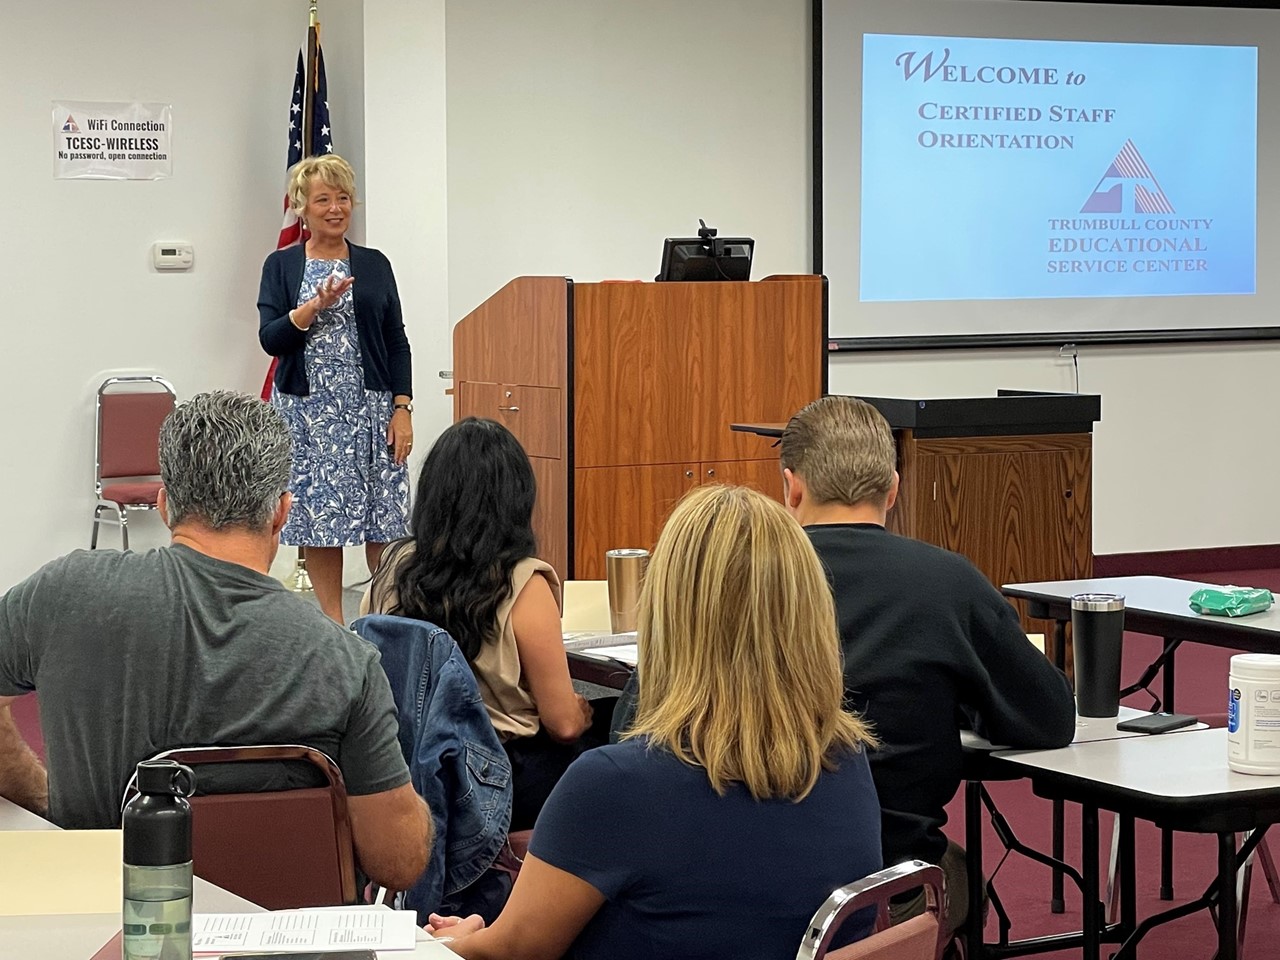 Human Resource Supervisor Carlotta Sheets addresses new hires at orientation as we prepare for the upcoming school year.